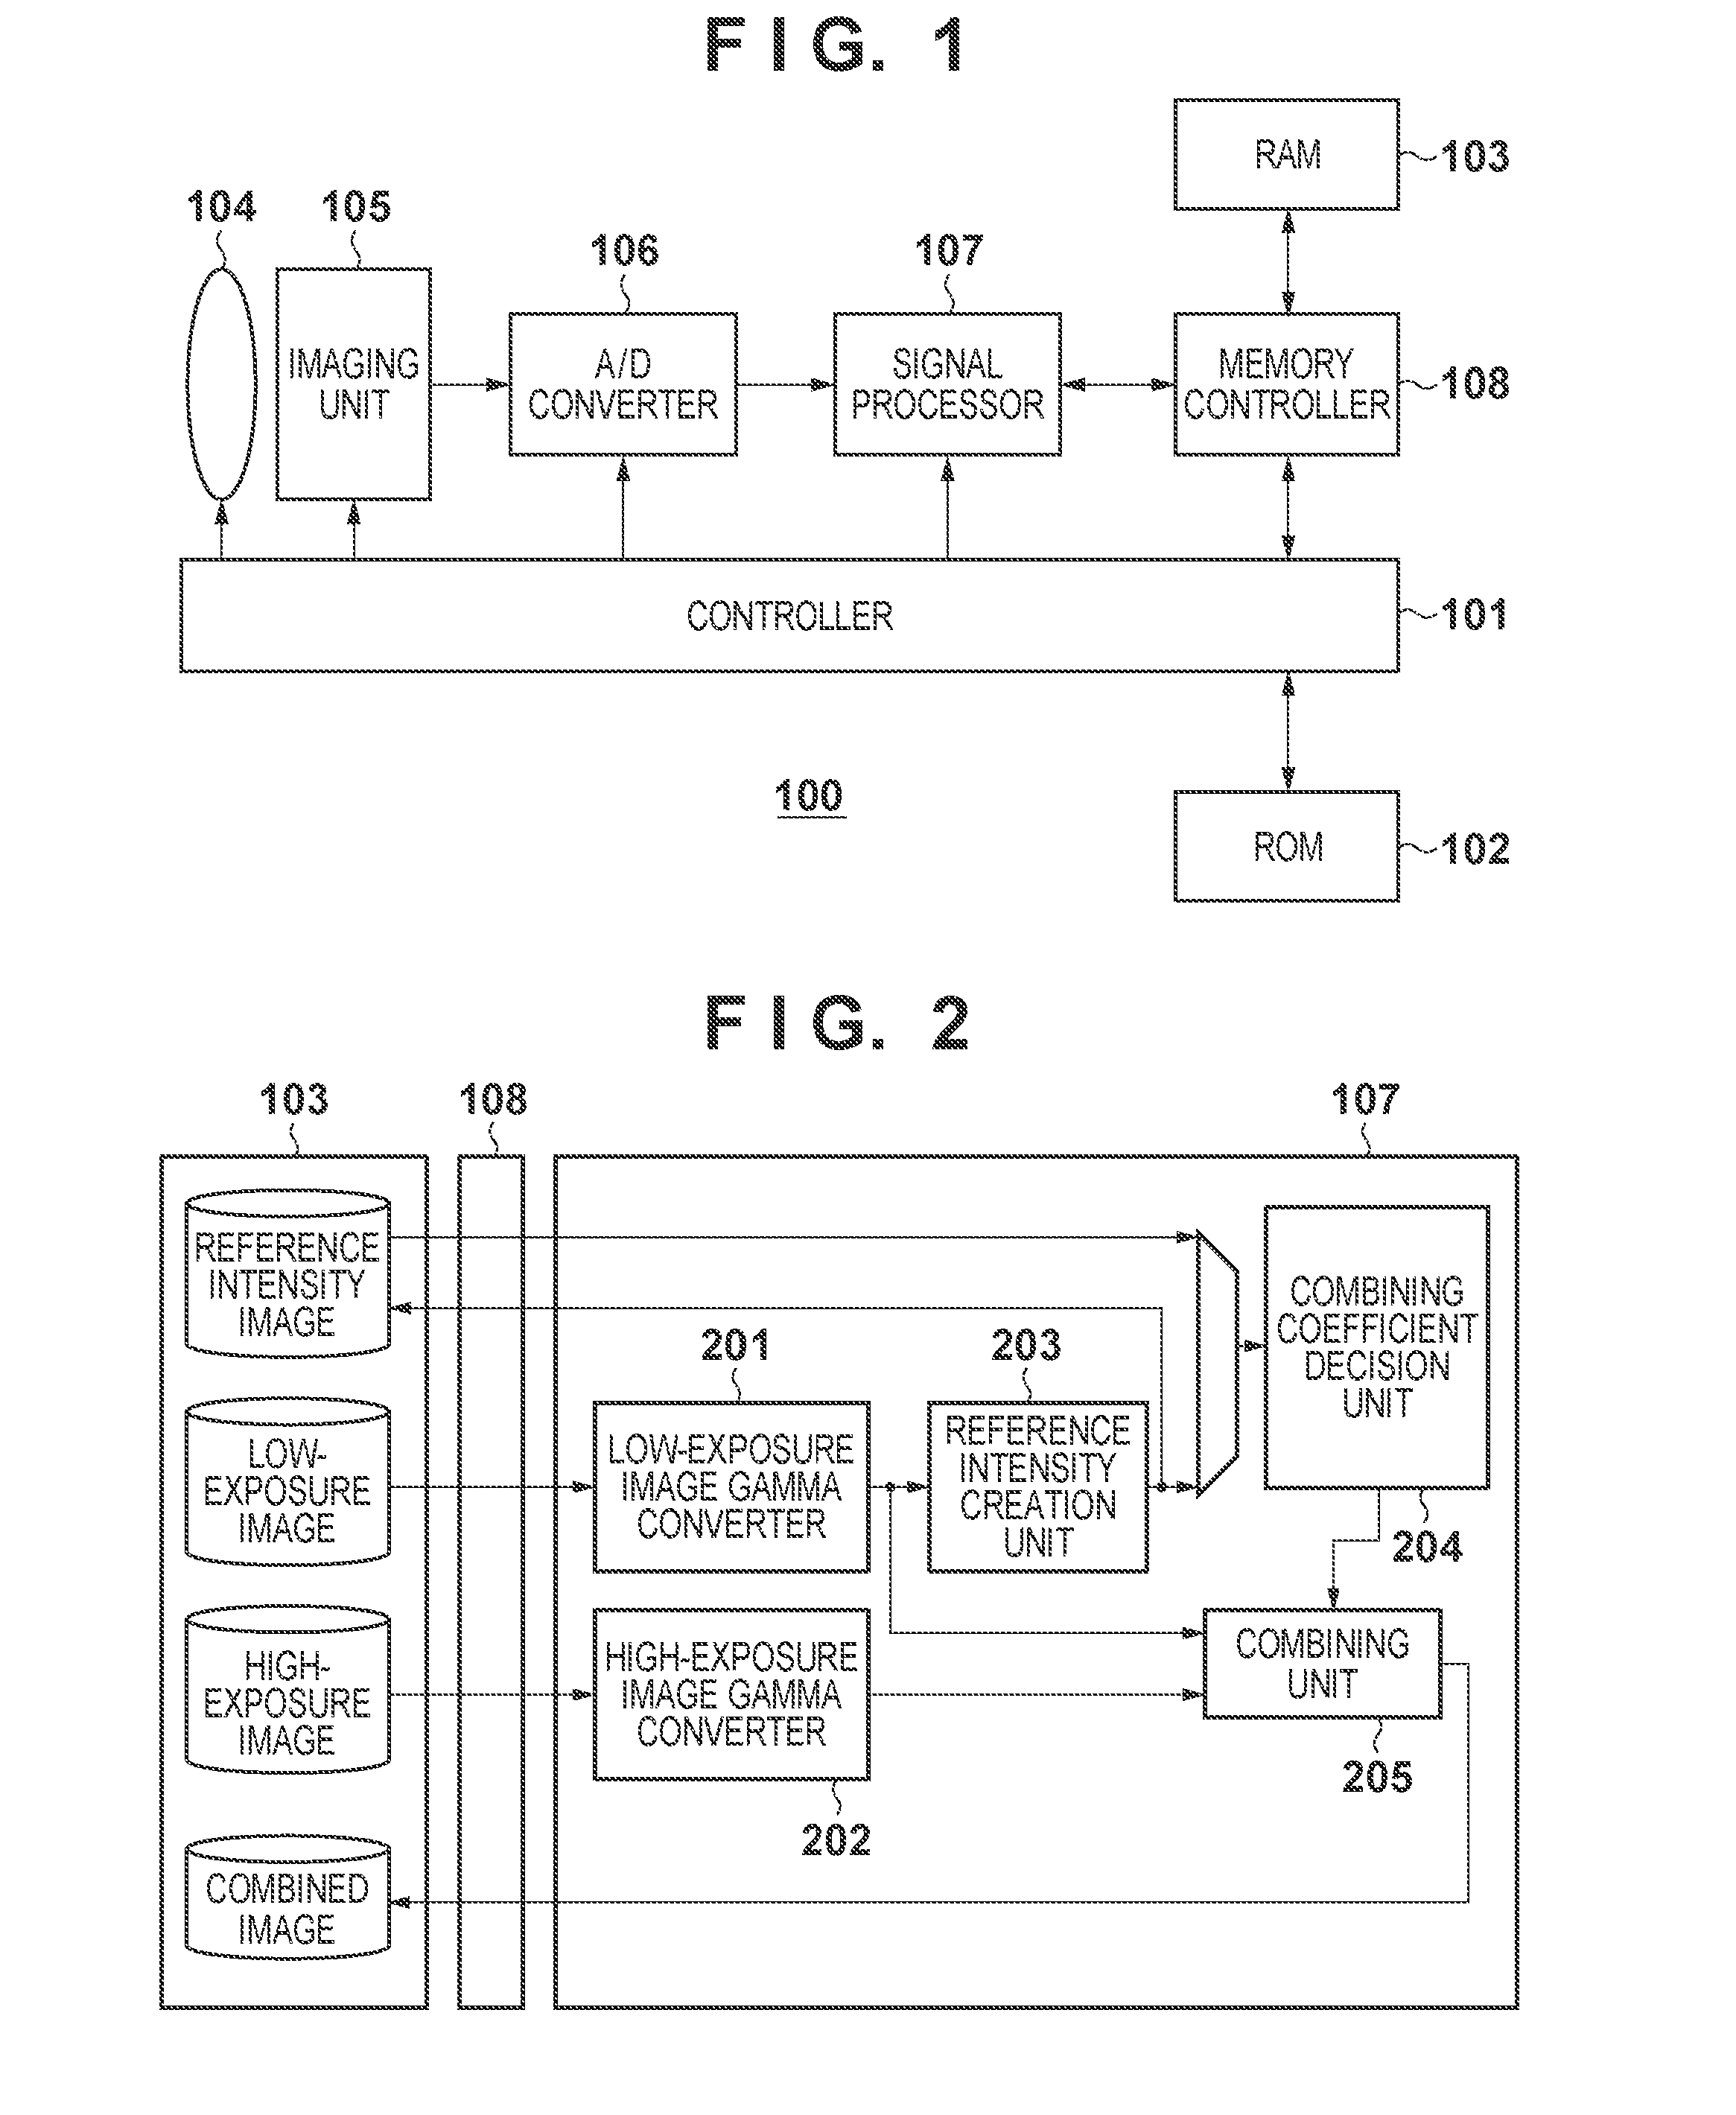 Image processing apparatus and method in which first and second images are combined in a weighted manner based on a third image